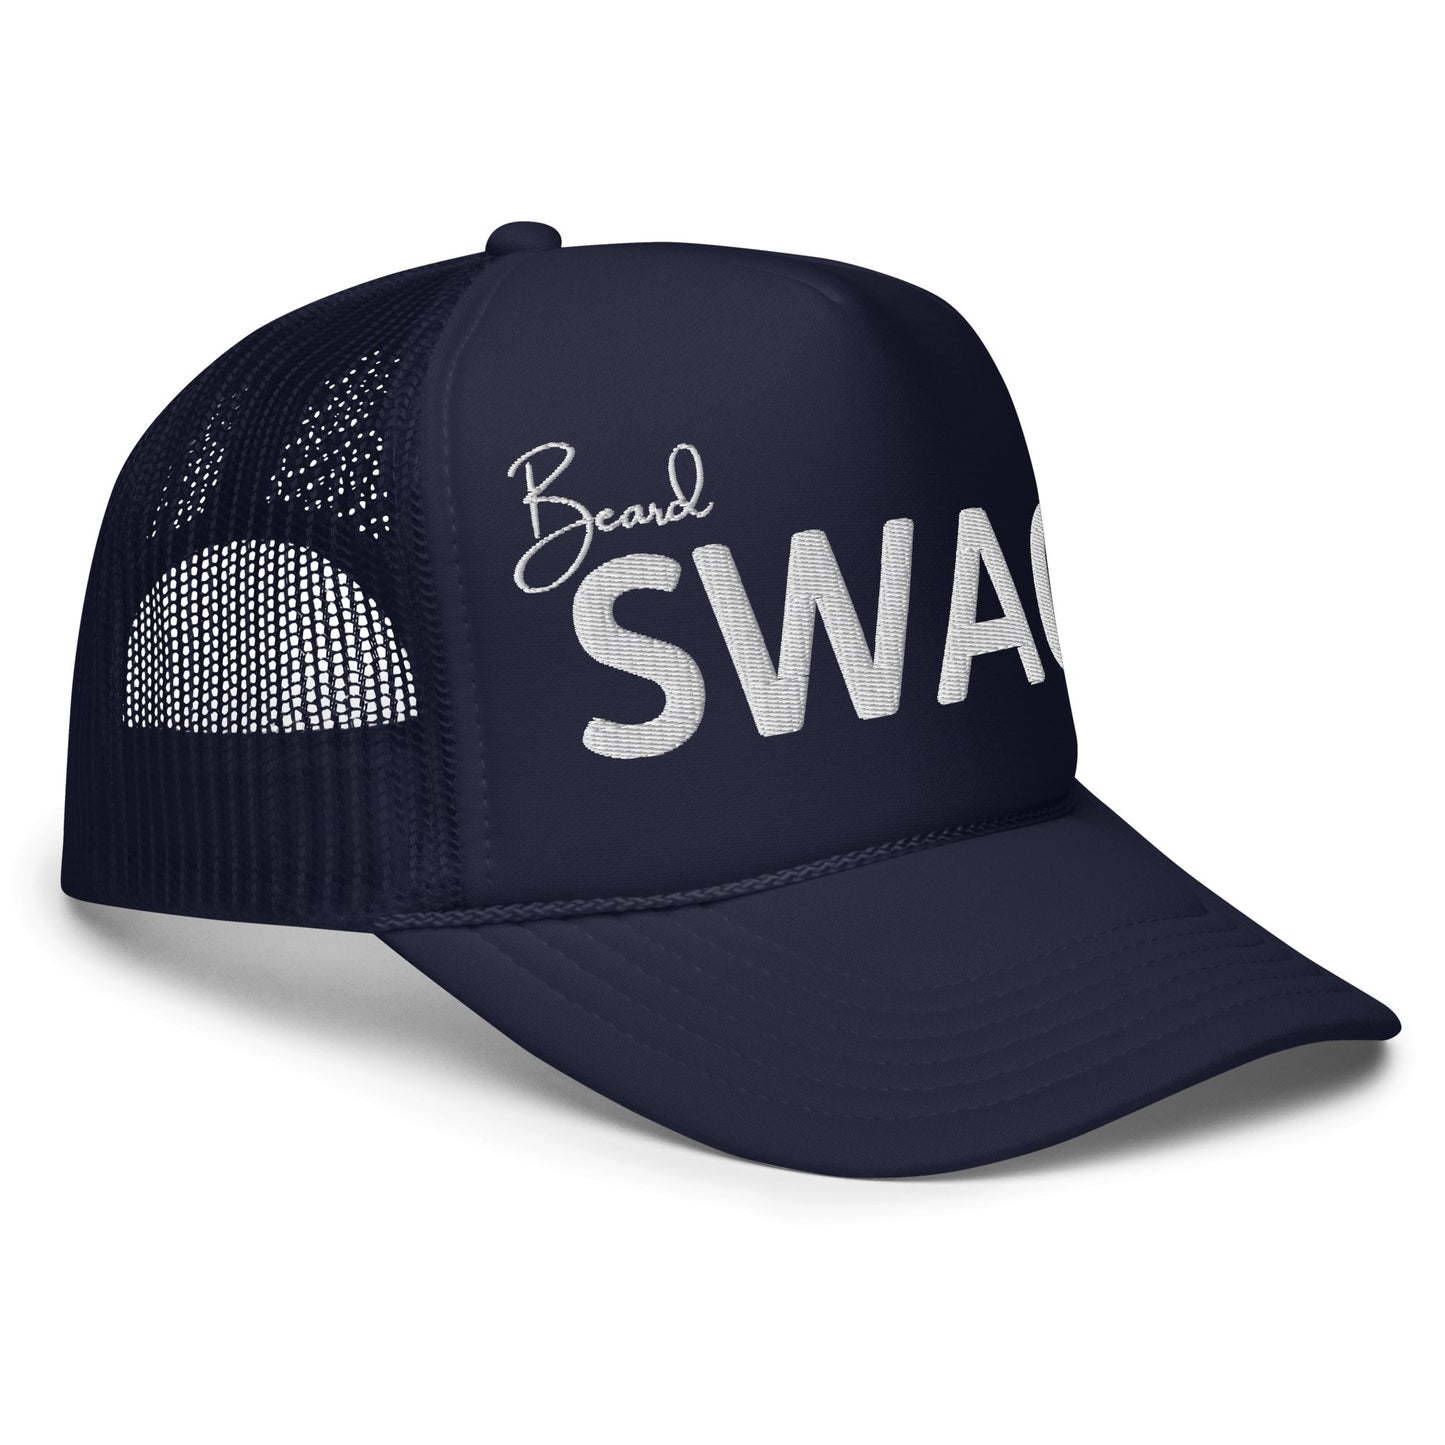 The Swag Hat - Beard Swag